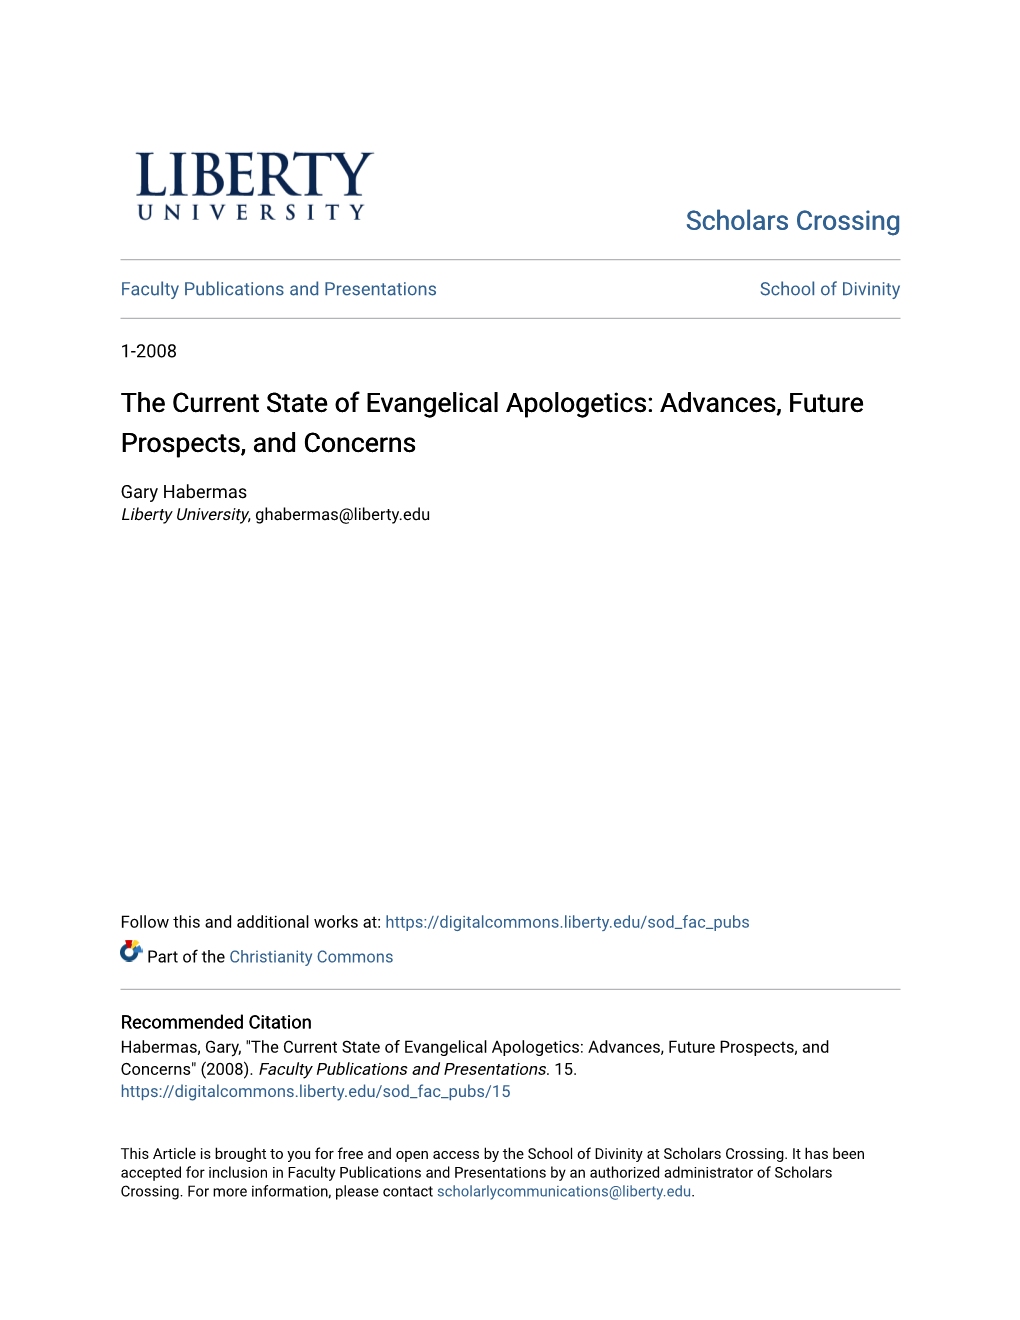 The Current State of Evangelical Apologetics: Advances, Future Prospects, and Concerns